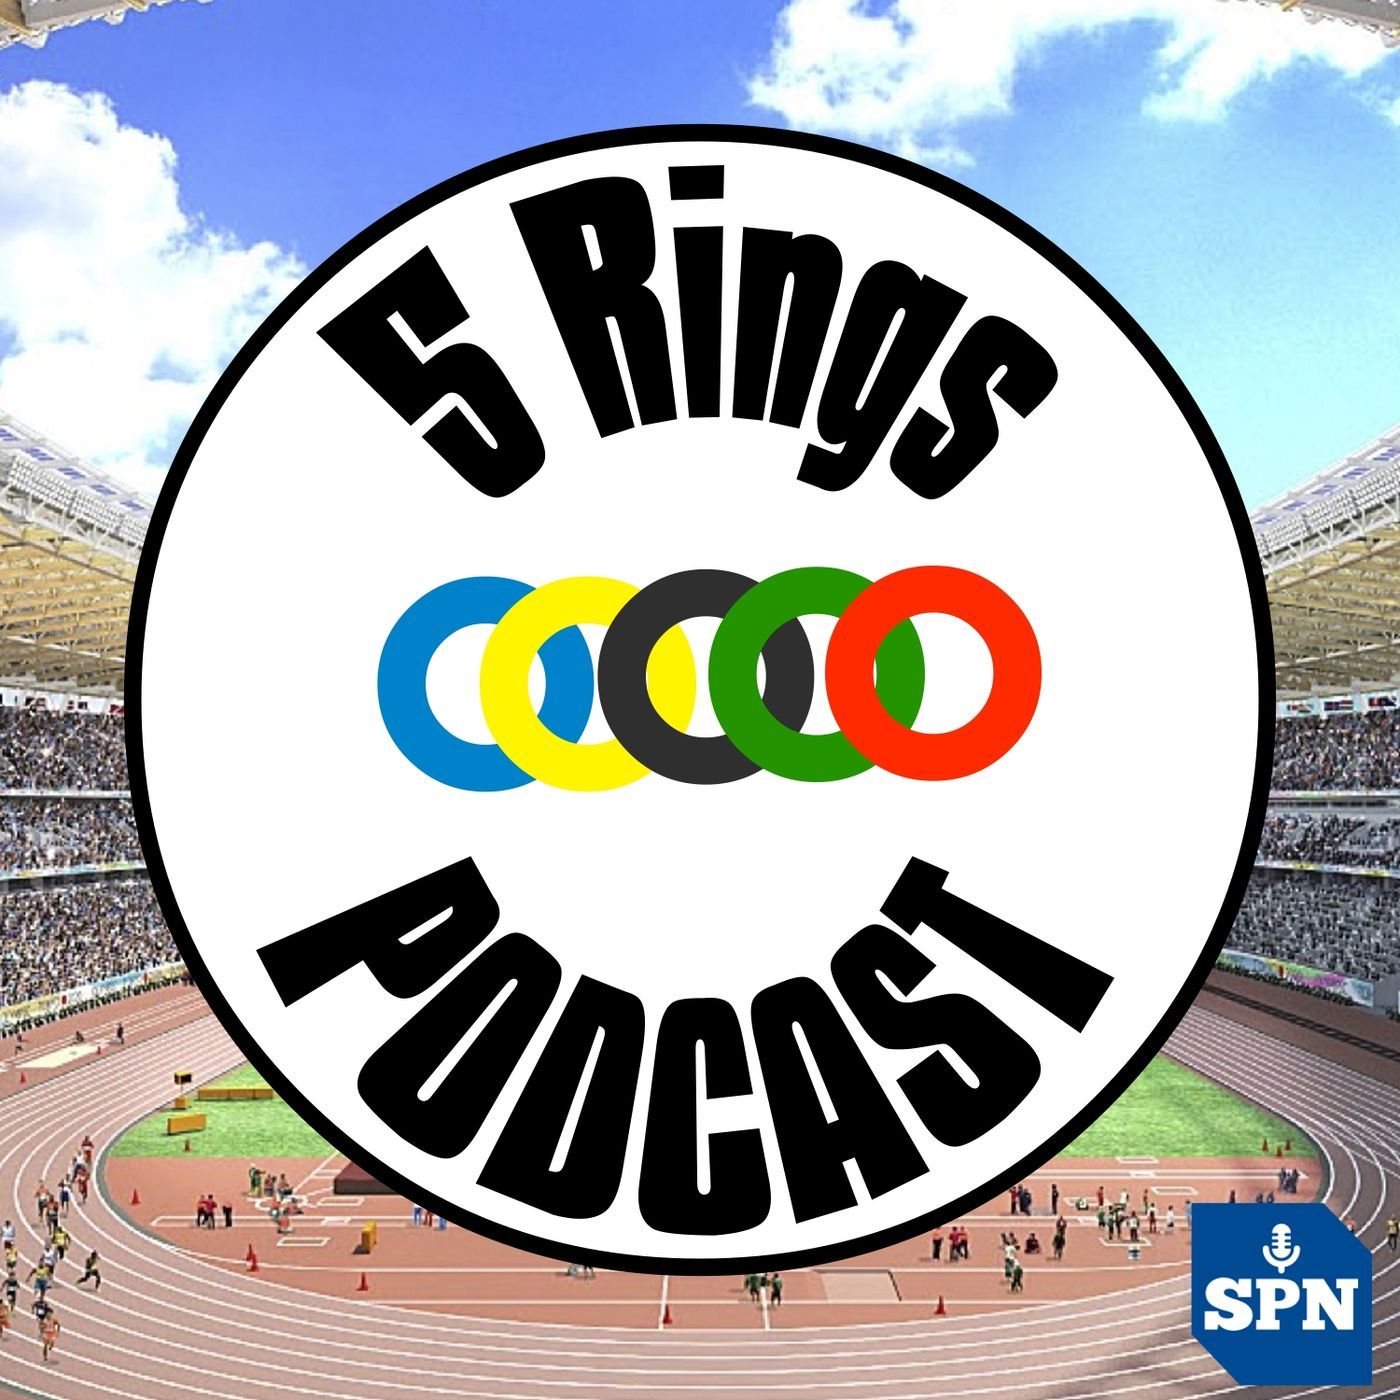 5 Rings Podcast - Daily Coverage of Tokyo 2020 with Kevin Laramee and Duane Rollins - Day 9 Review